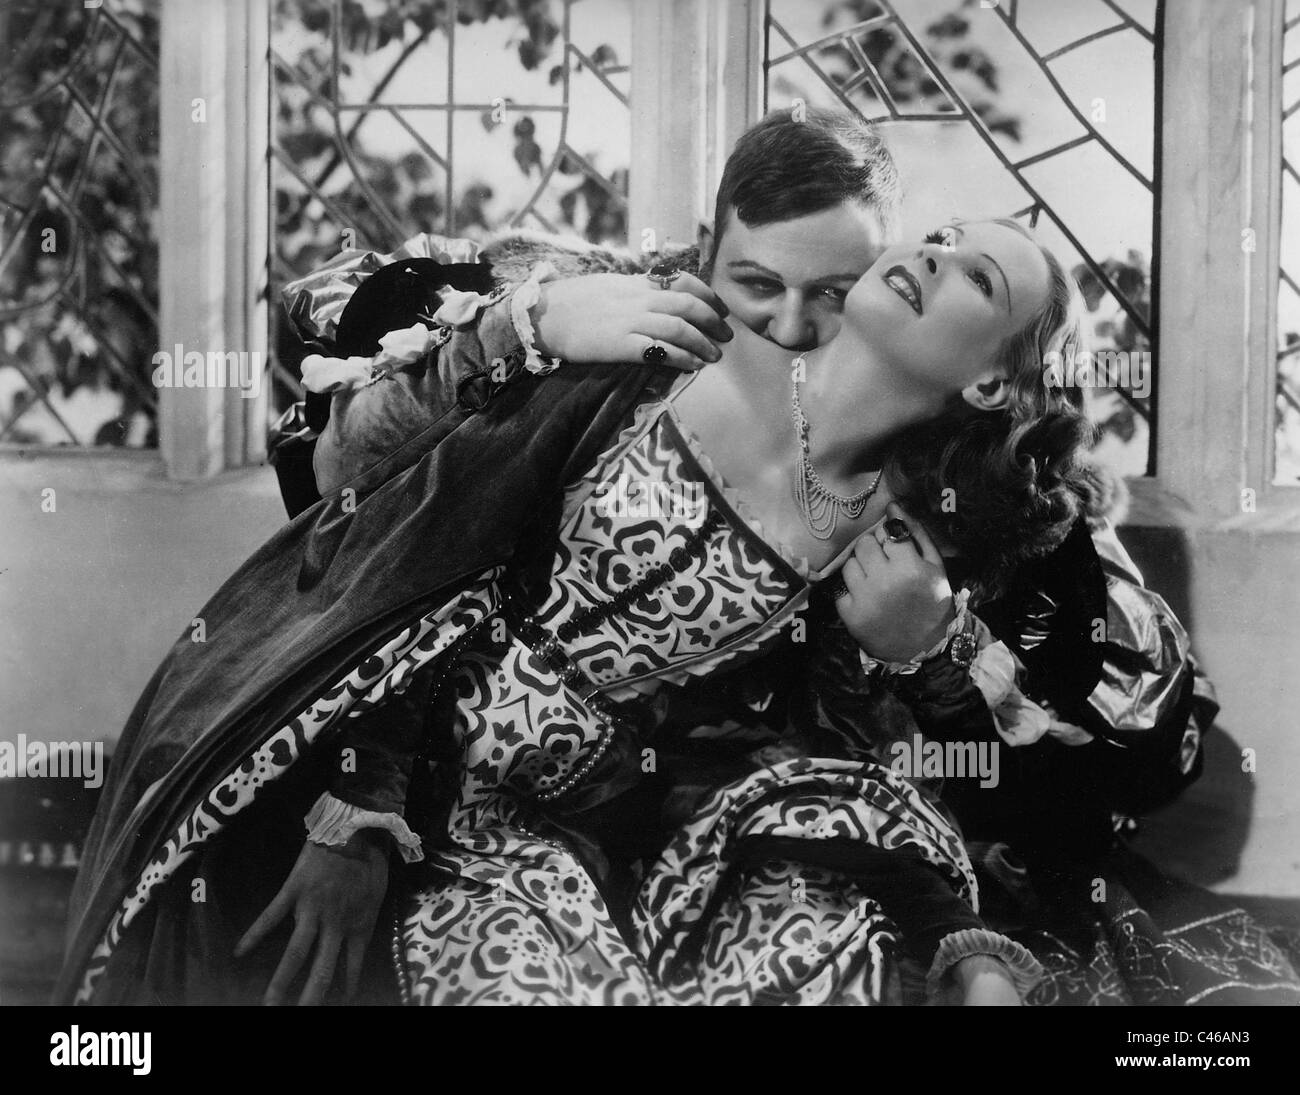 Charles Laughton und Wendy Barrie in "The Private Life of Henry VIII", 1933 Stockfoto